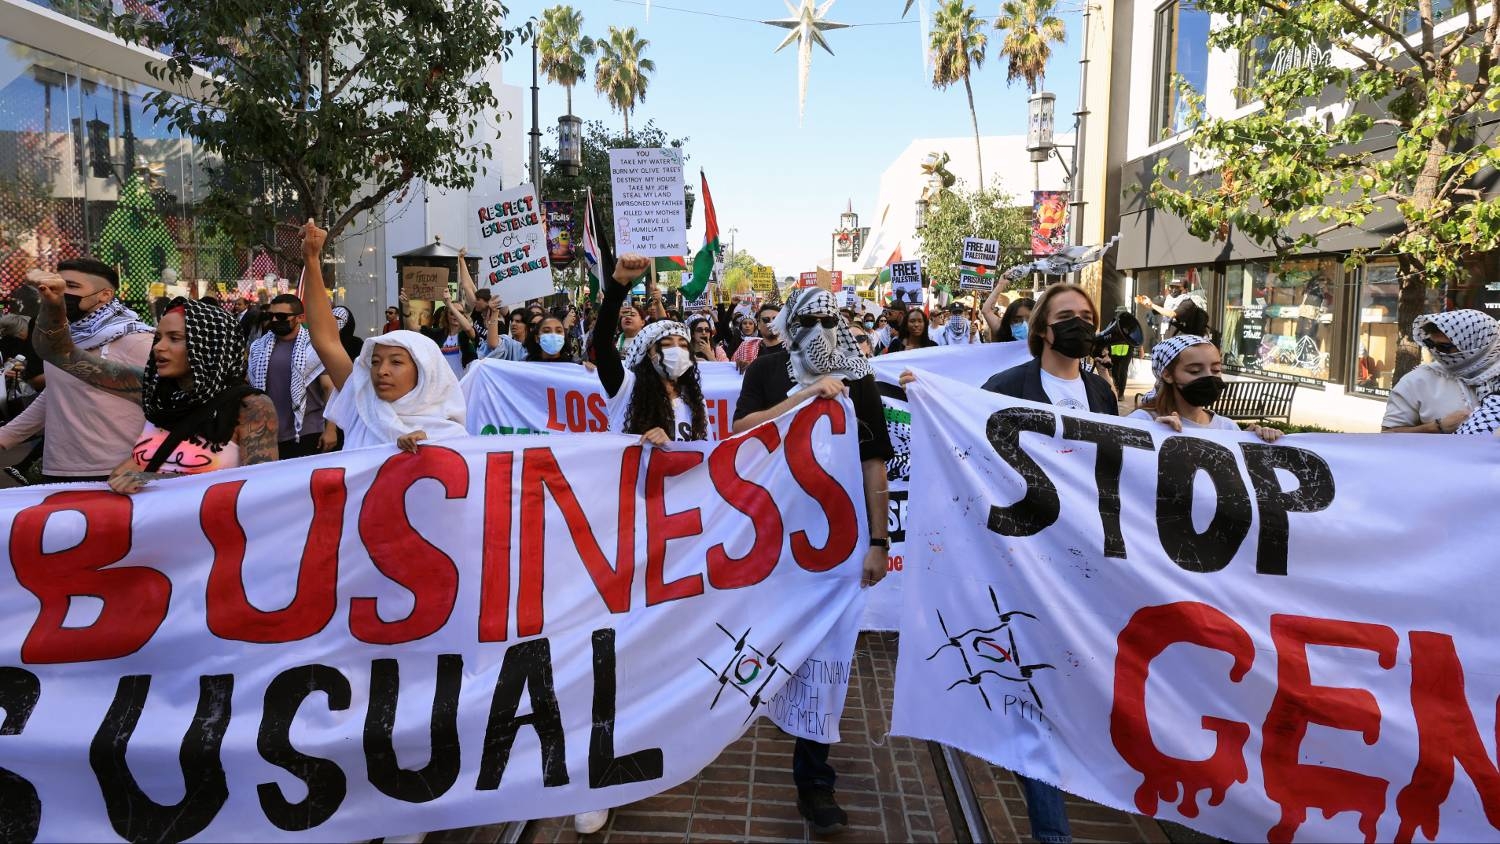 Streets are shut down and shopping is disrupted as pro-Palestinian supporters march through a high-end shopping centre in Los Angeles on 24 November 2023.